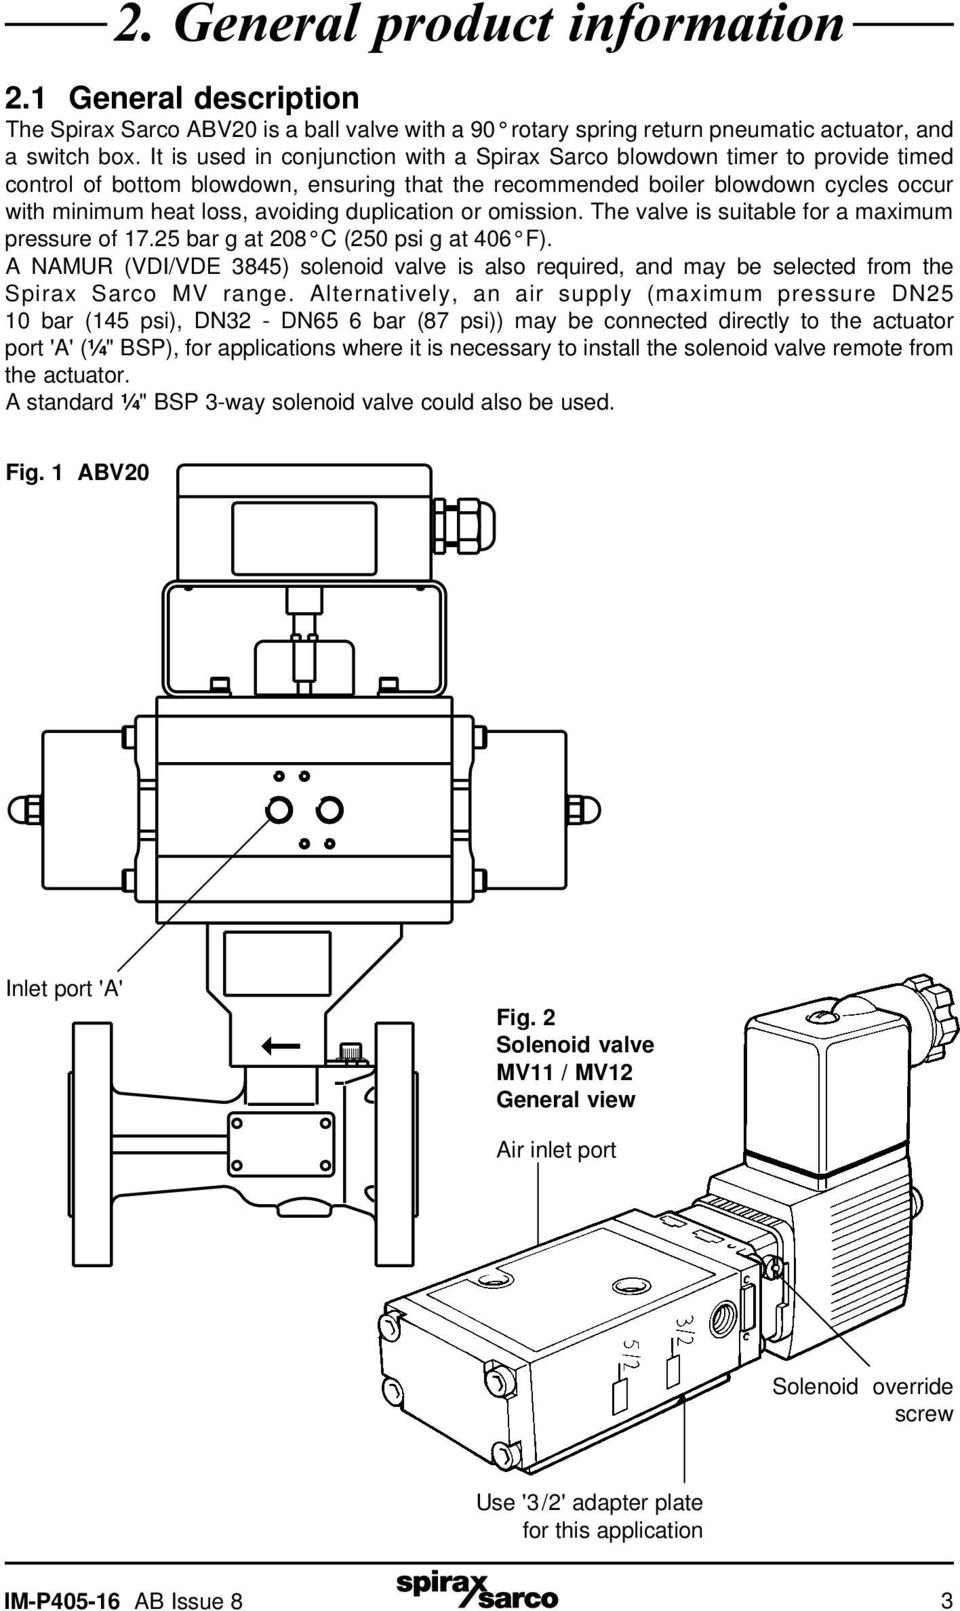 duplication or omission. The valve is suitable for a maximum pressure of 17.25 bar g at 208 C (250 psi g at 406 F).